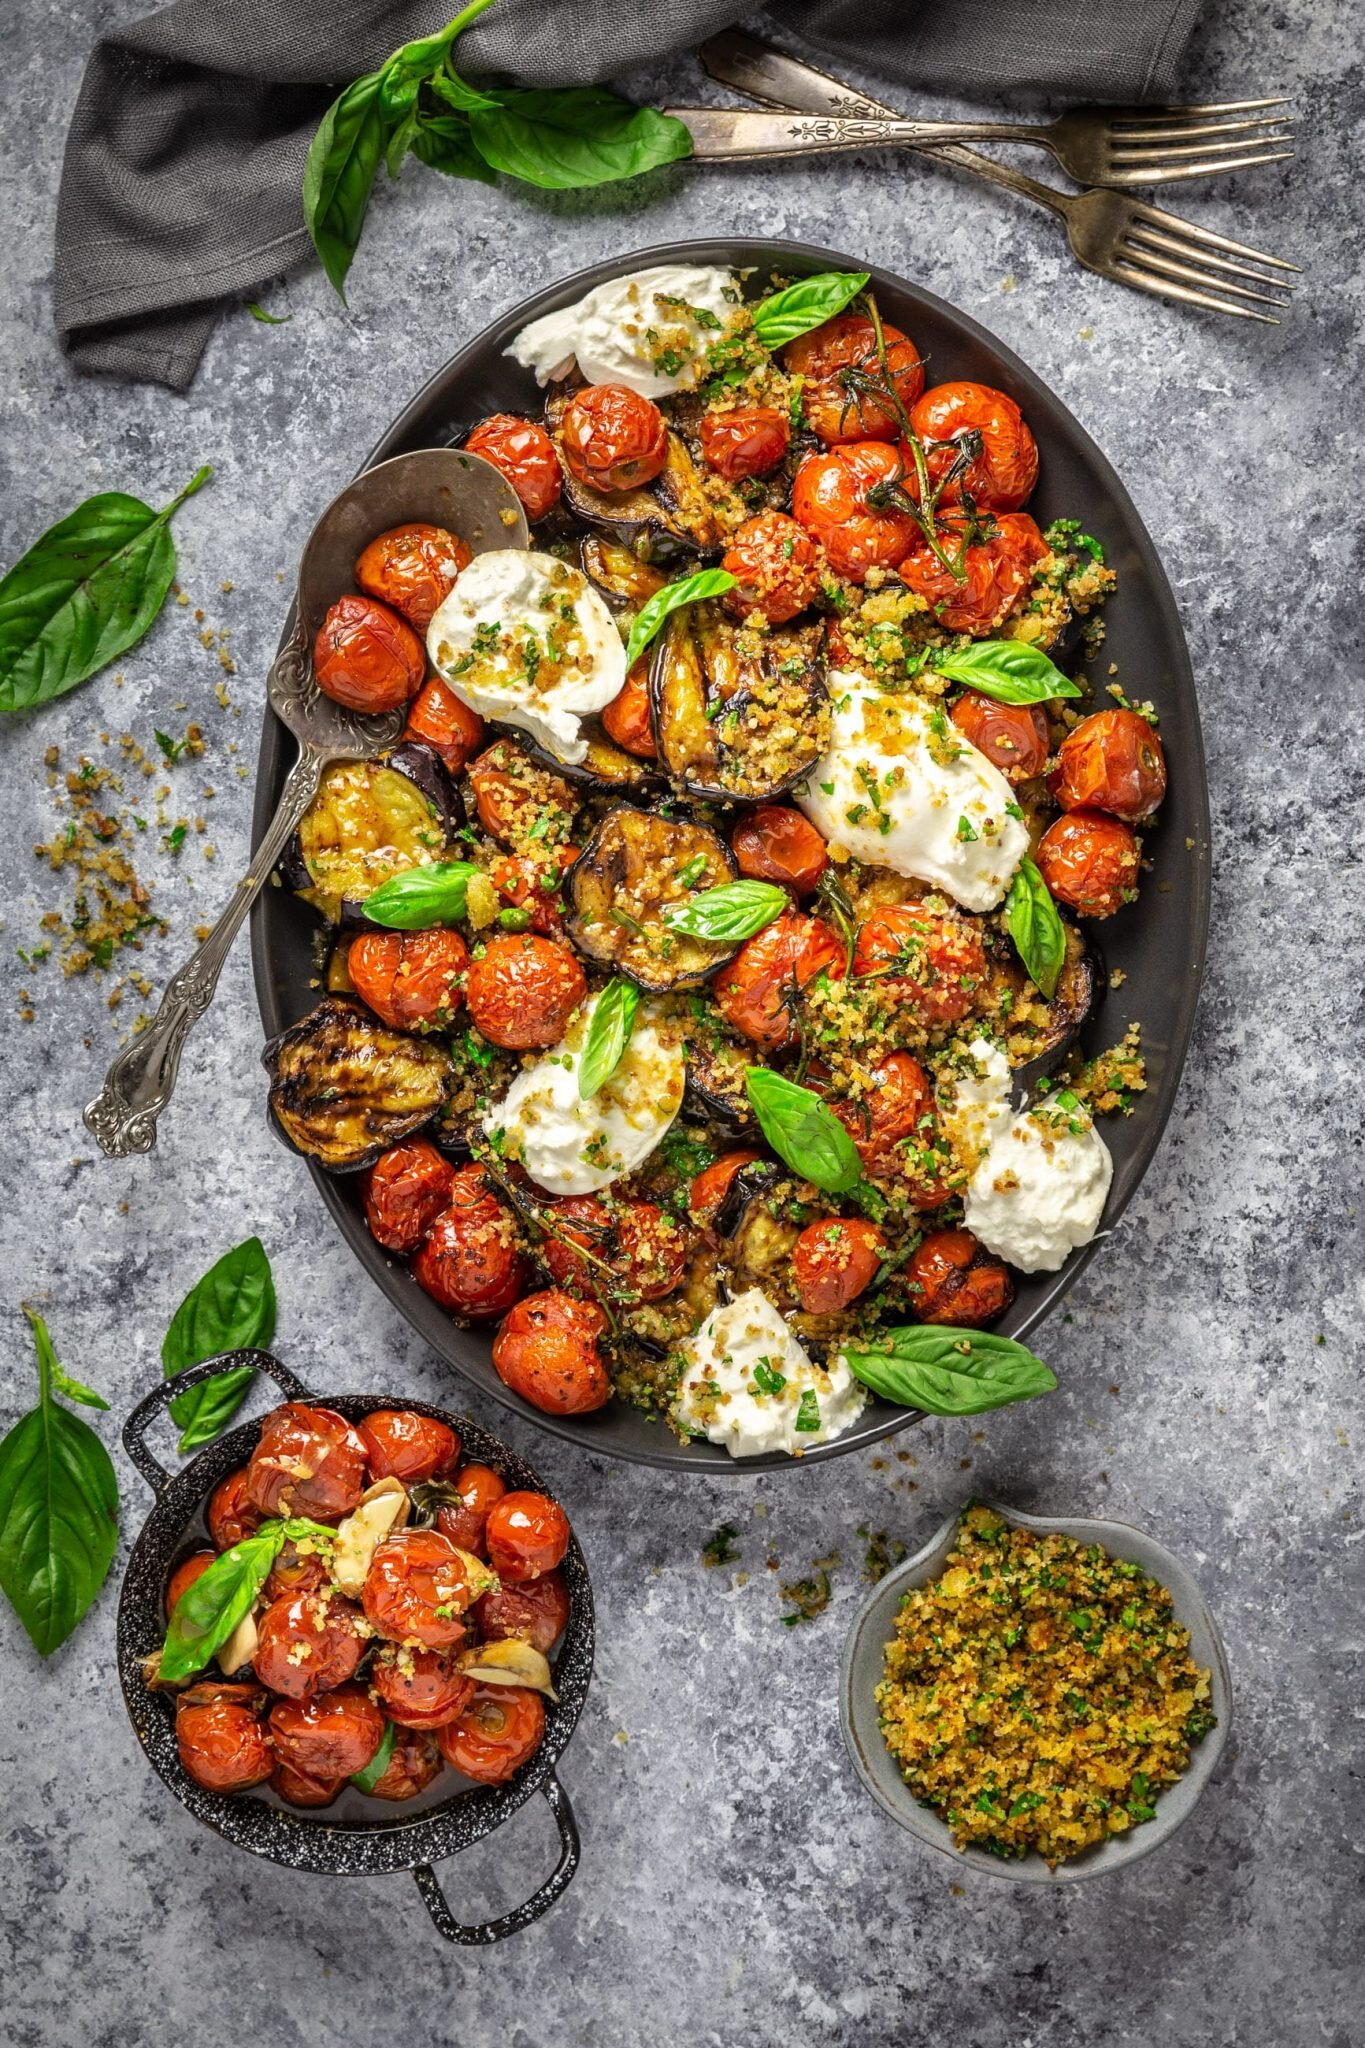 Grilled Eggplant Parmesan with Roasted Tomatoes, Burrata and Garlic Herb Breadcrumbs